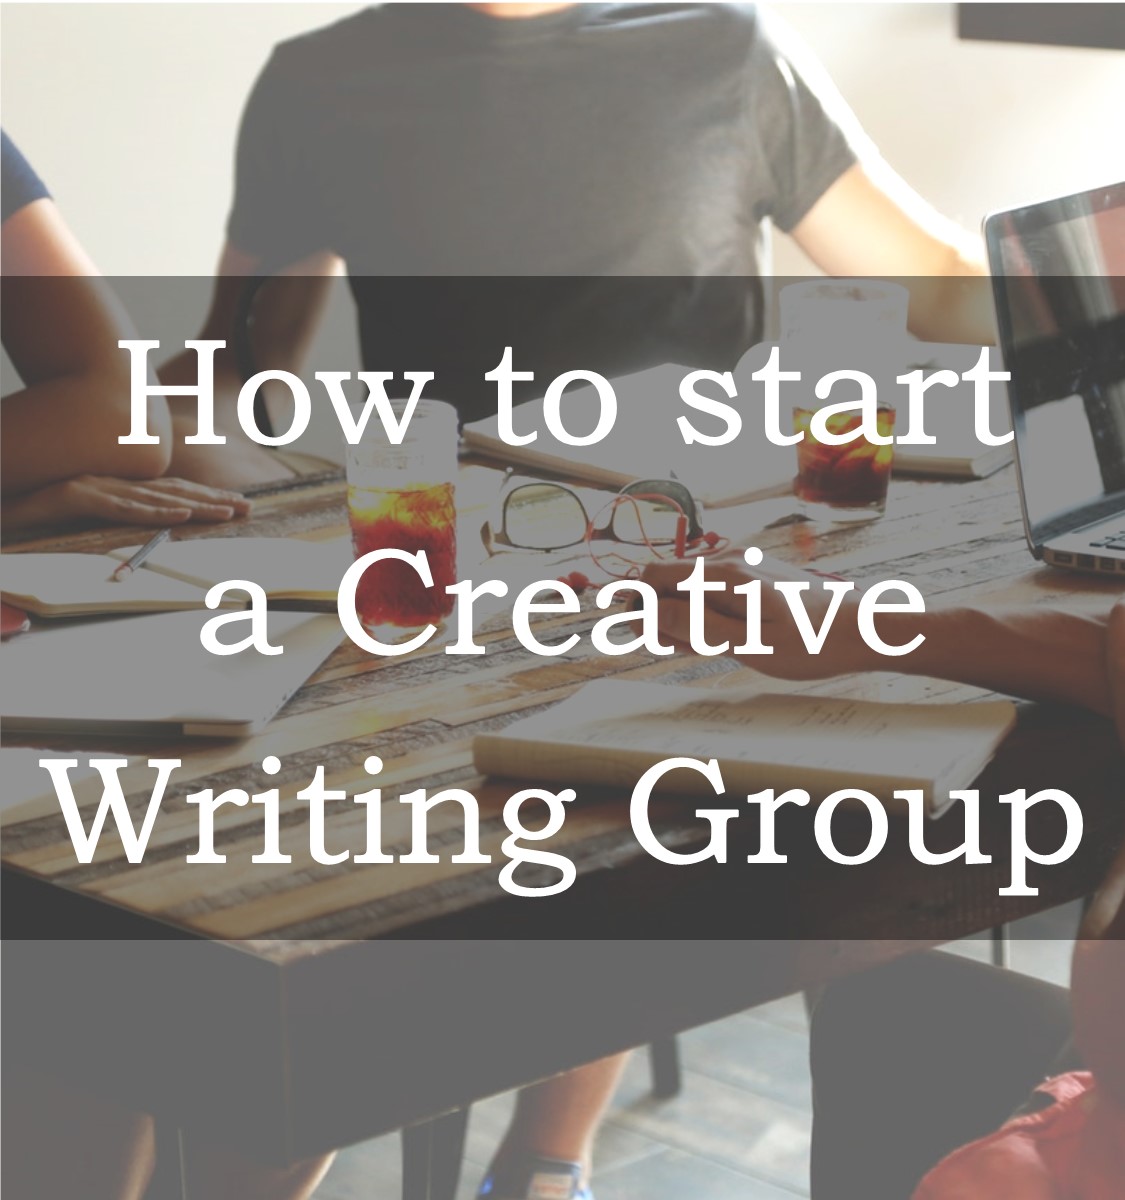 How to Start a Creative Writing Group